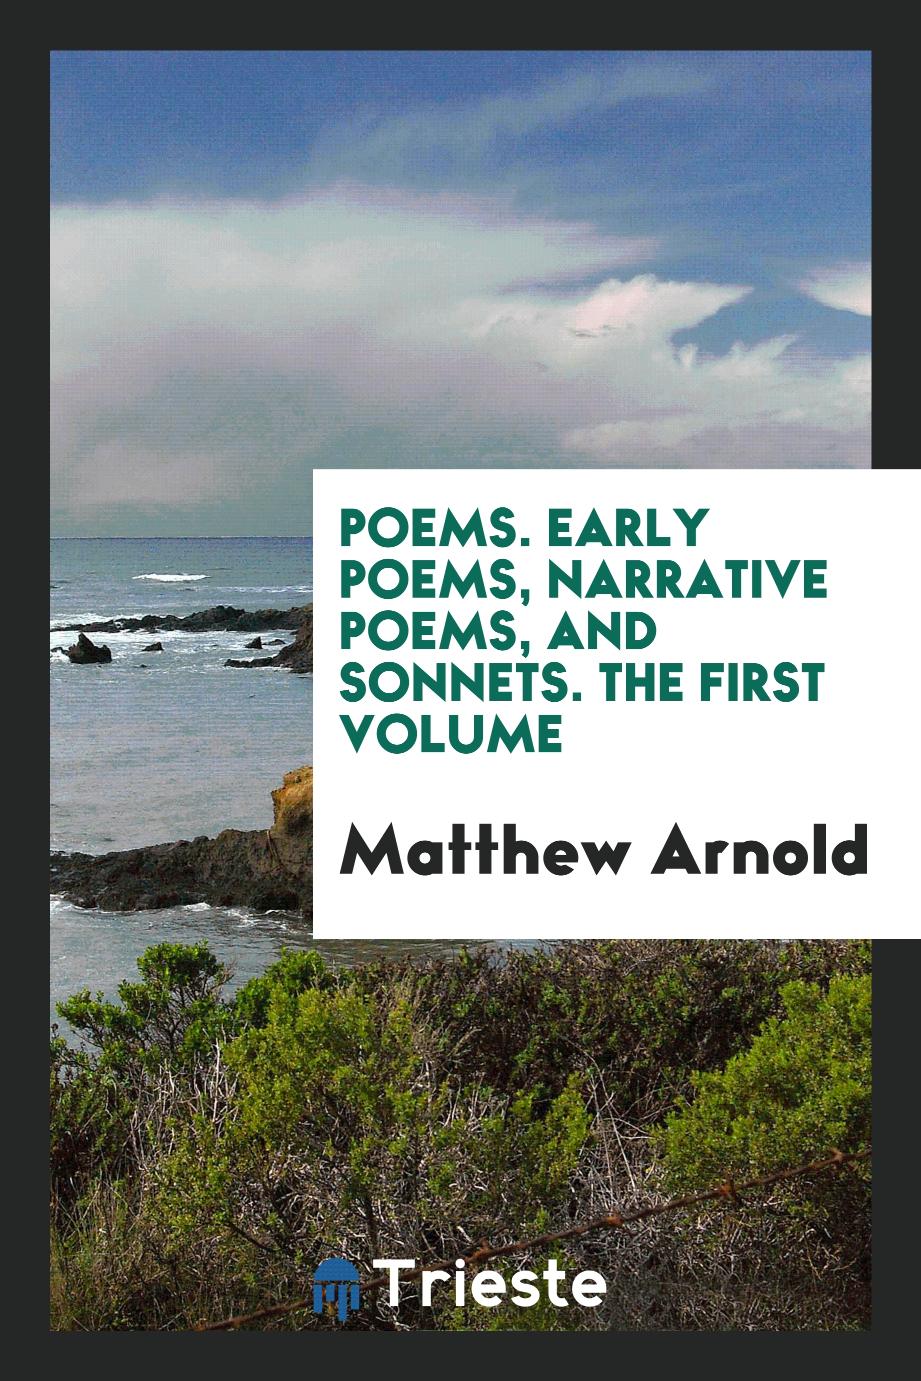 Poems. Early Poems, Narrative Poems, and Sonnets. The First Volume